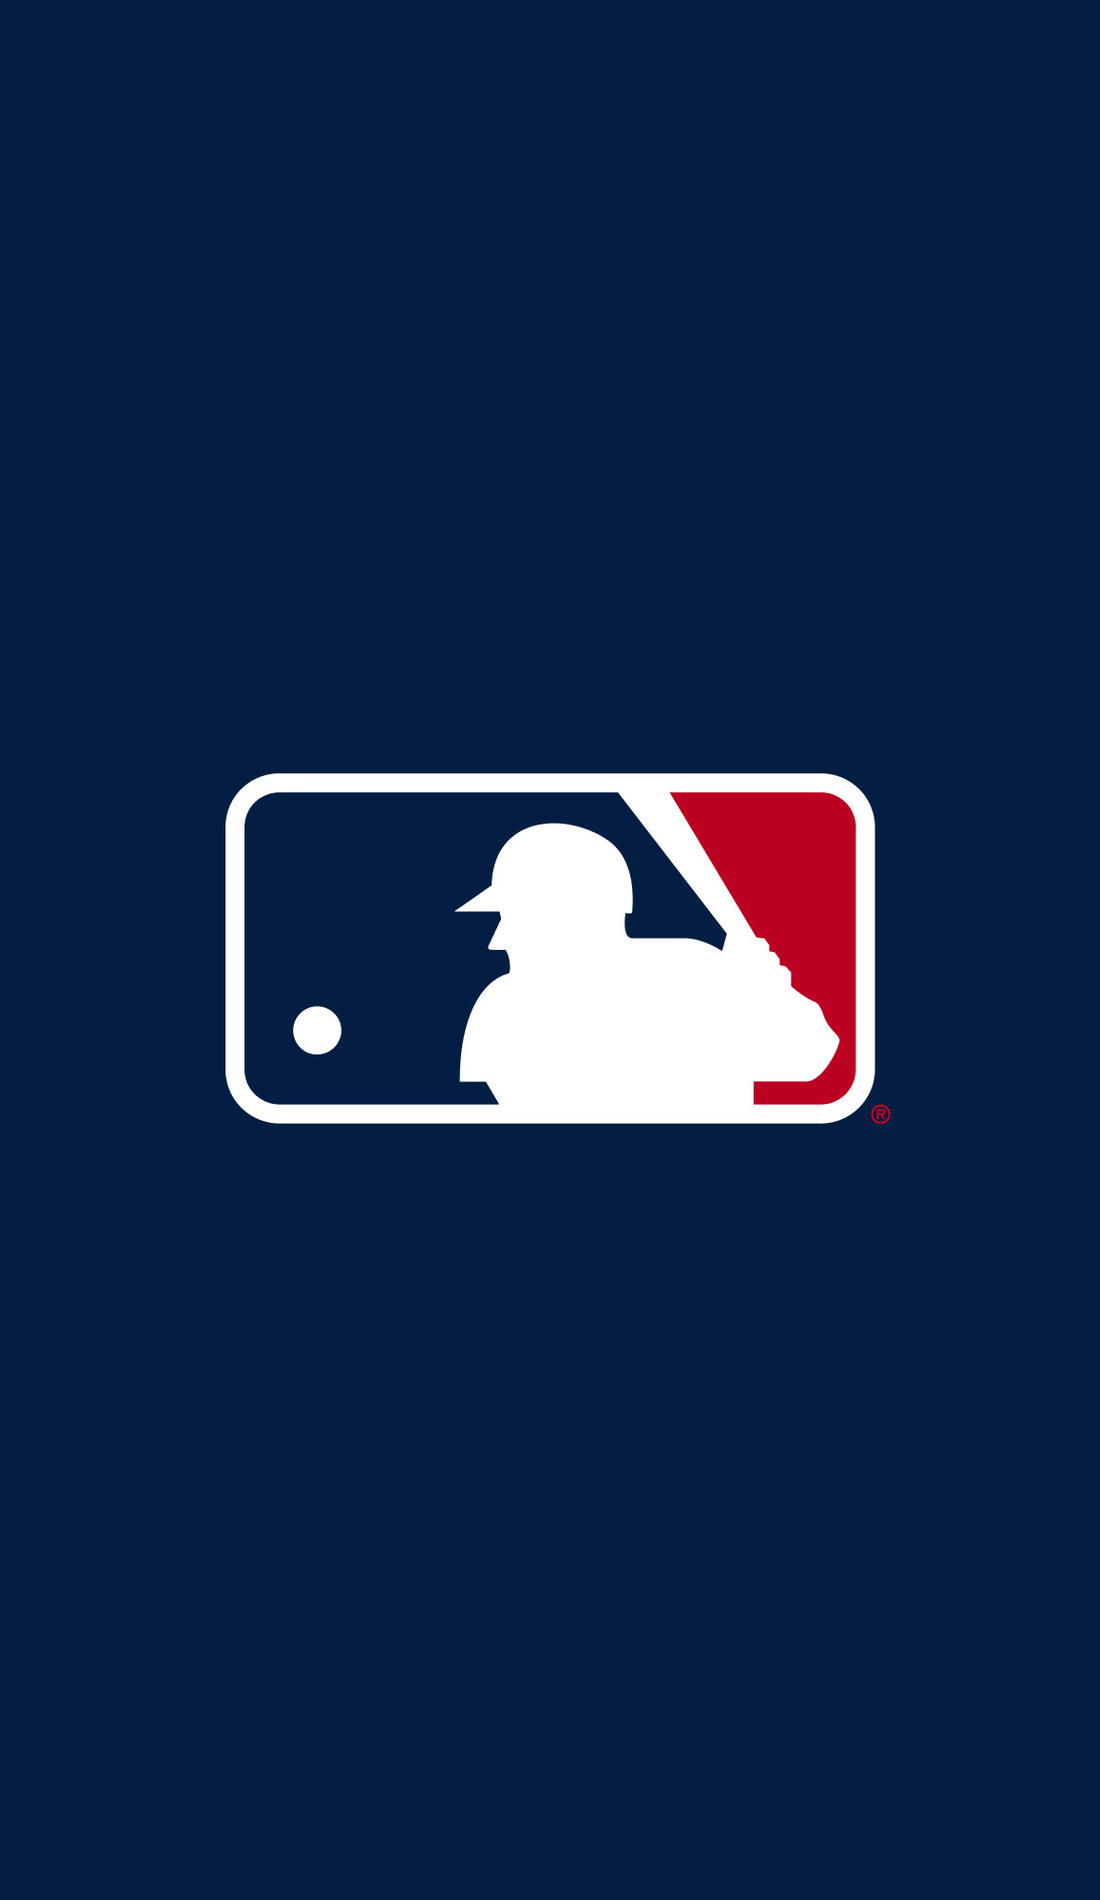 MLB releases 2023 postseason schedule with playoffs opening on Oct 3  World Series Game 7 set for Nov 4  CBSSportscom